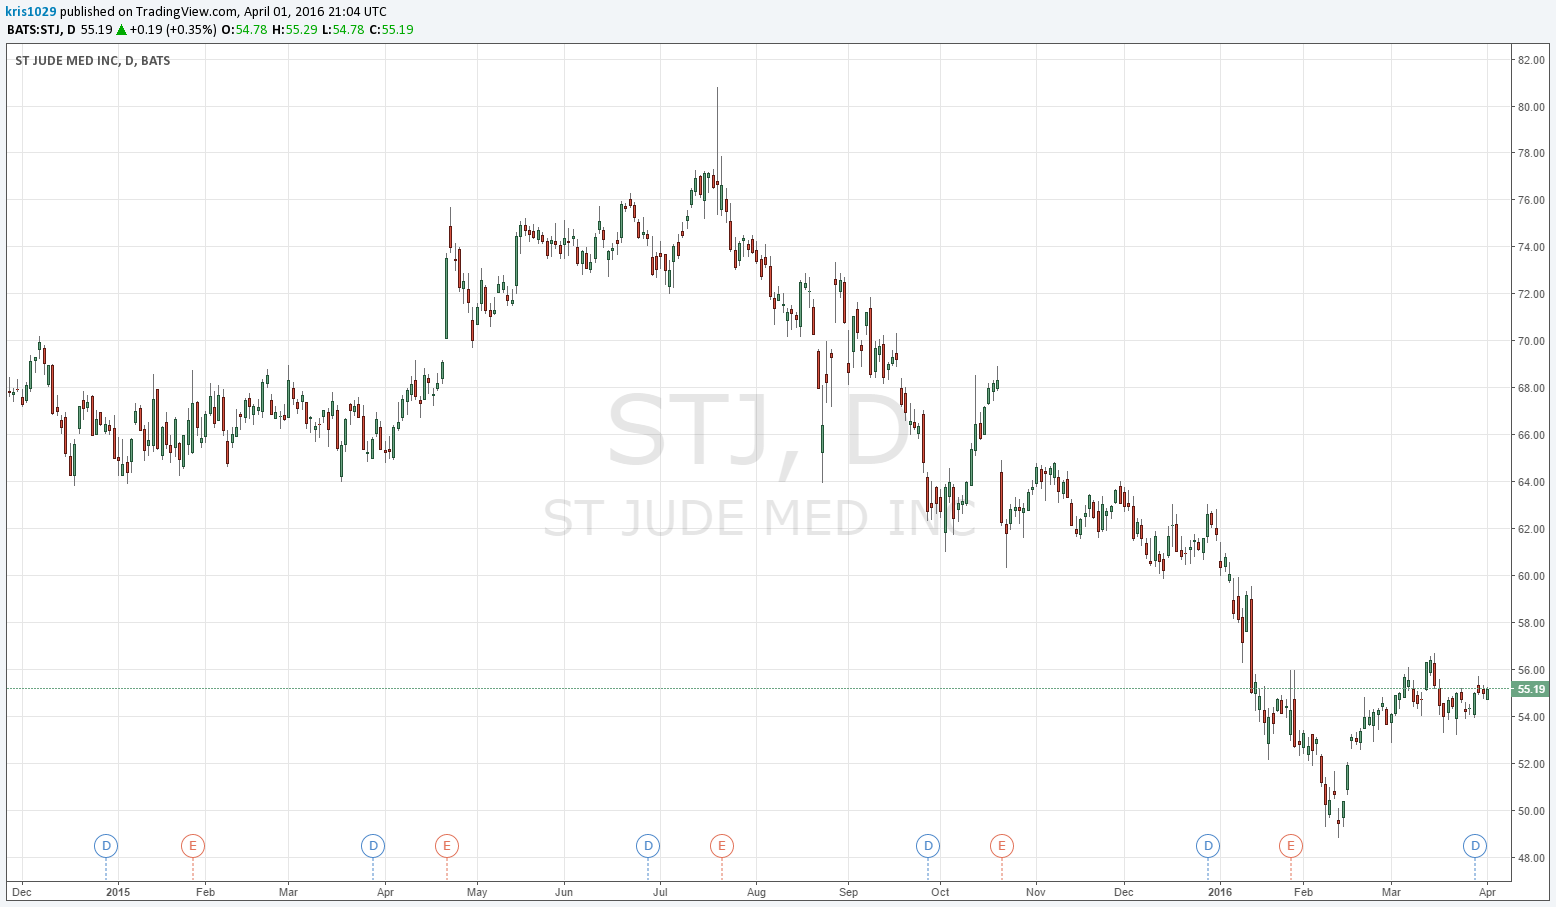 St Jude Medical Stock Chart